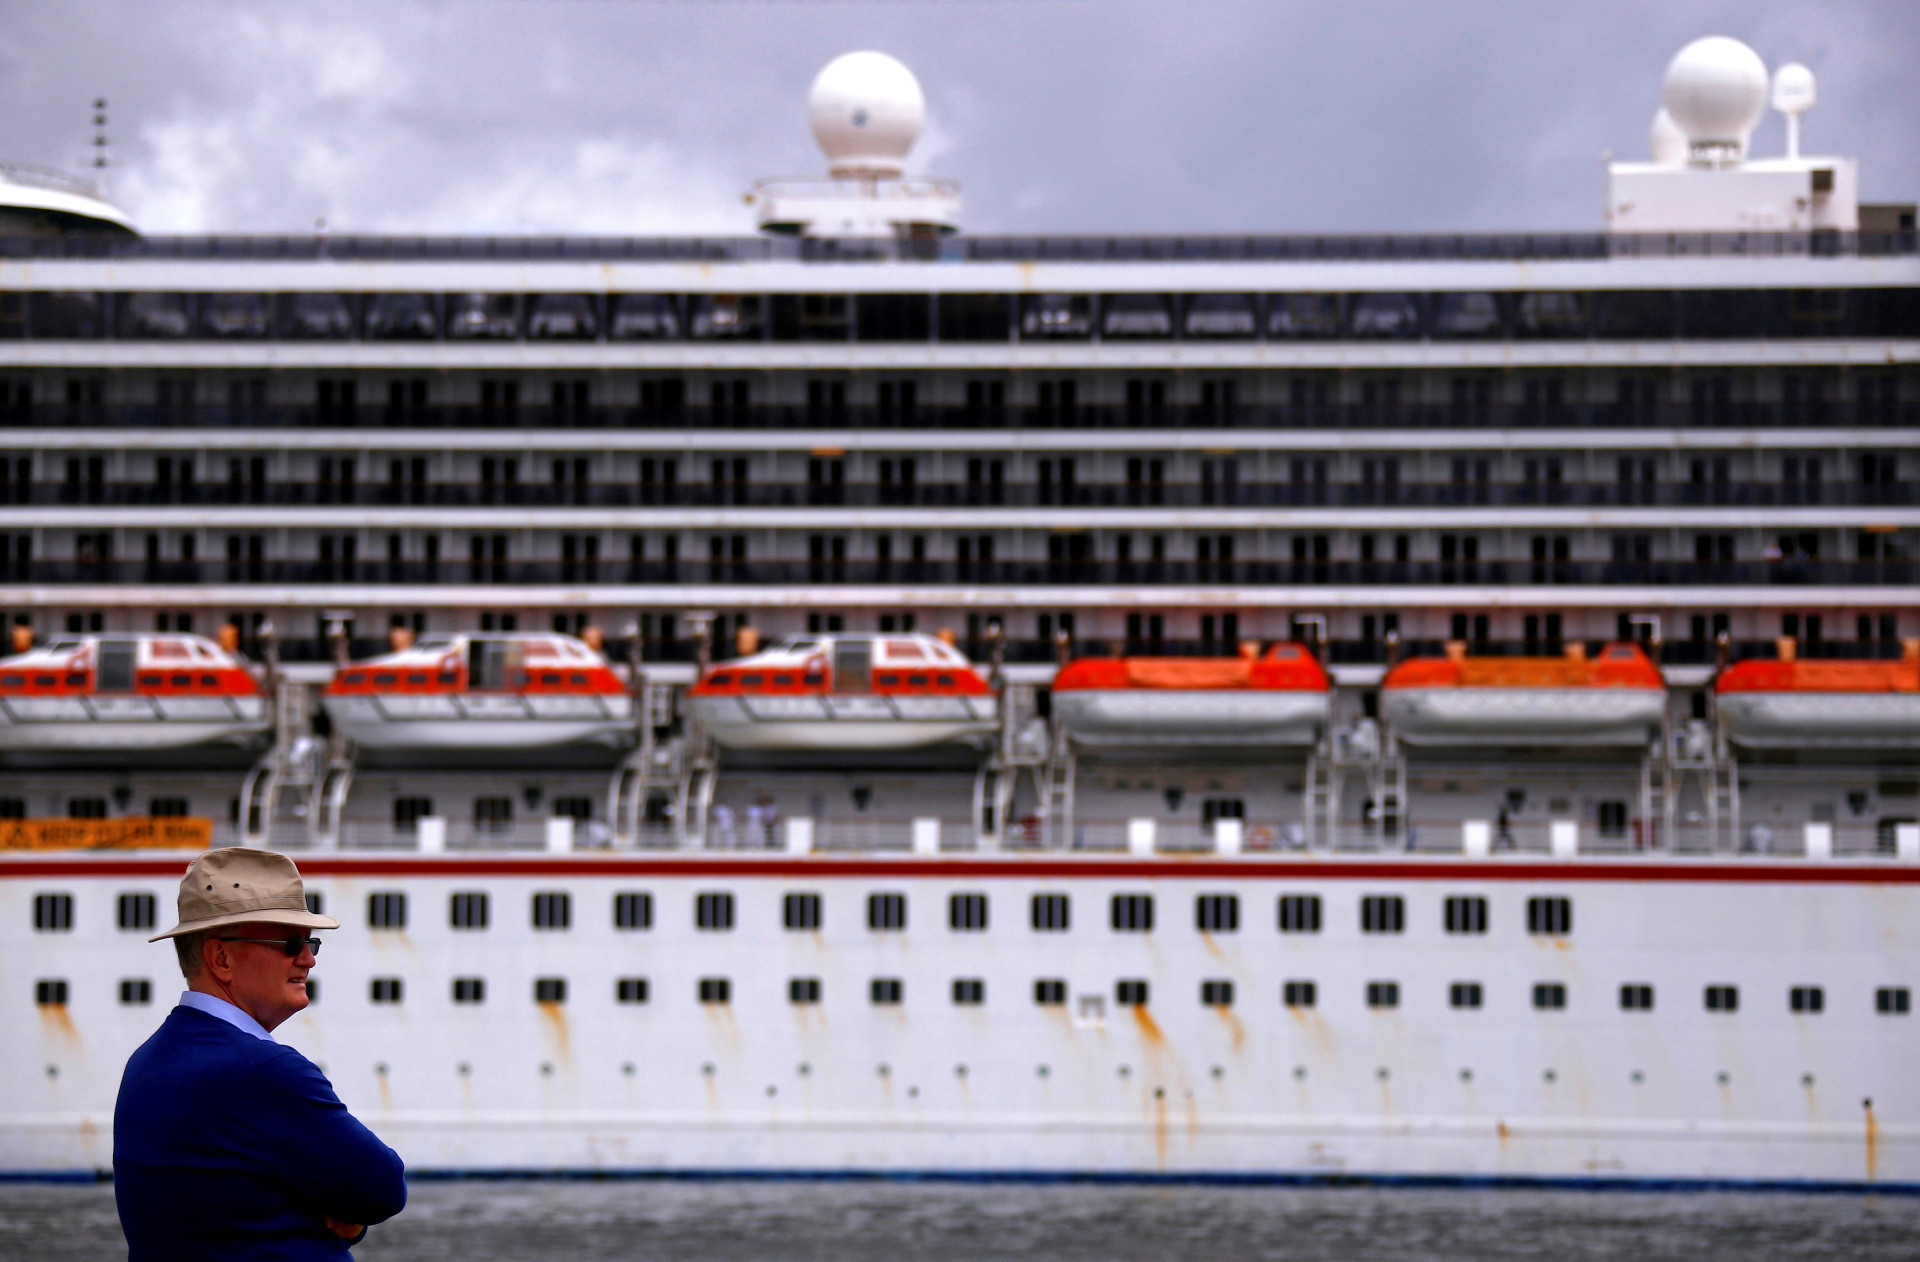 <p>Multiple reports confirm that there were approximately 270 disappearances from cruise ships between 2000 and 2016. Since then, there has continued to be an average of 20-25 disappearances per year. </p><p><a href="https://www.msn.com/en-us/community/channel/vid-7xx8mnucu55yw63we9va2gwr7uihbxwc68fxqp25x6tg4ftibpra?cvid=94631541bc0f4f89bfd59158d696ad7e">Follow us and access great exclusive content every day</a></p>